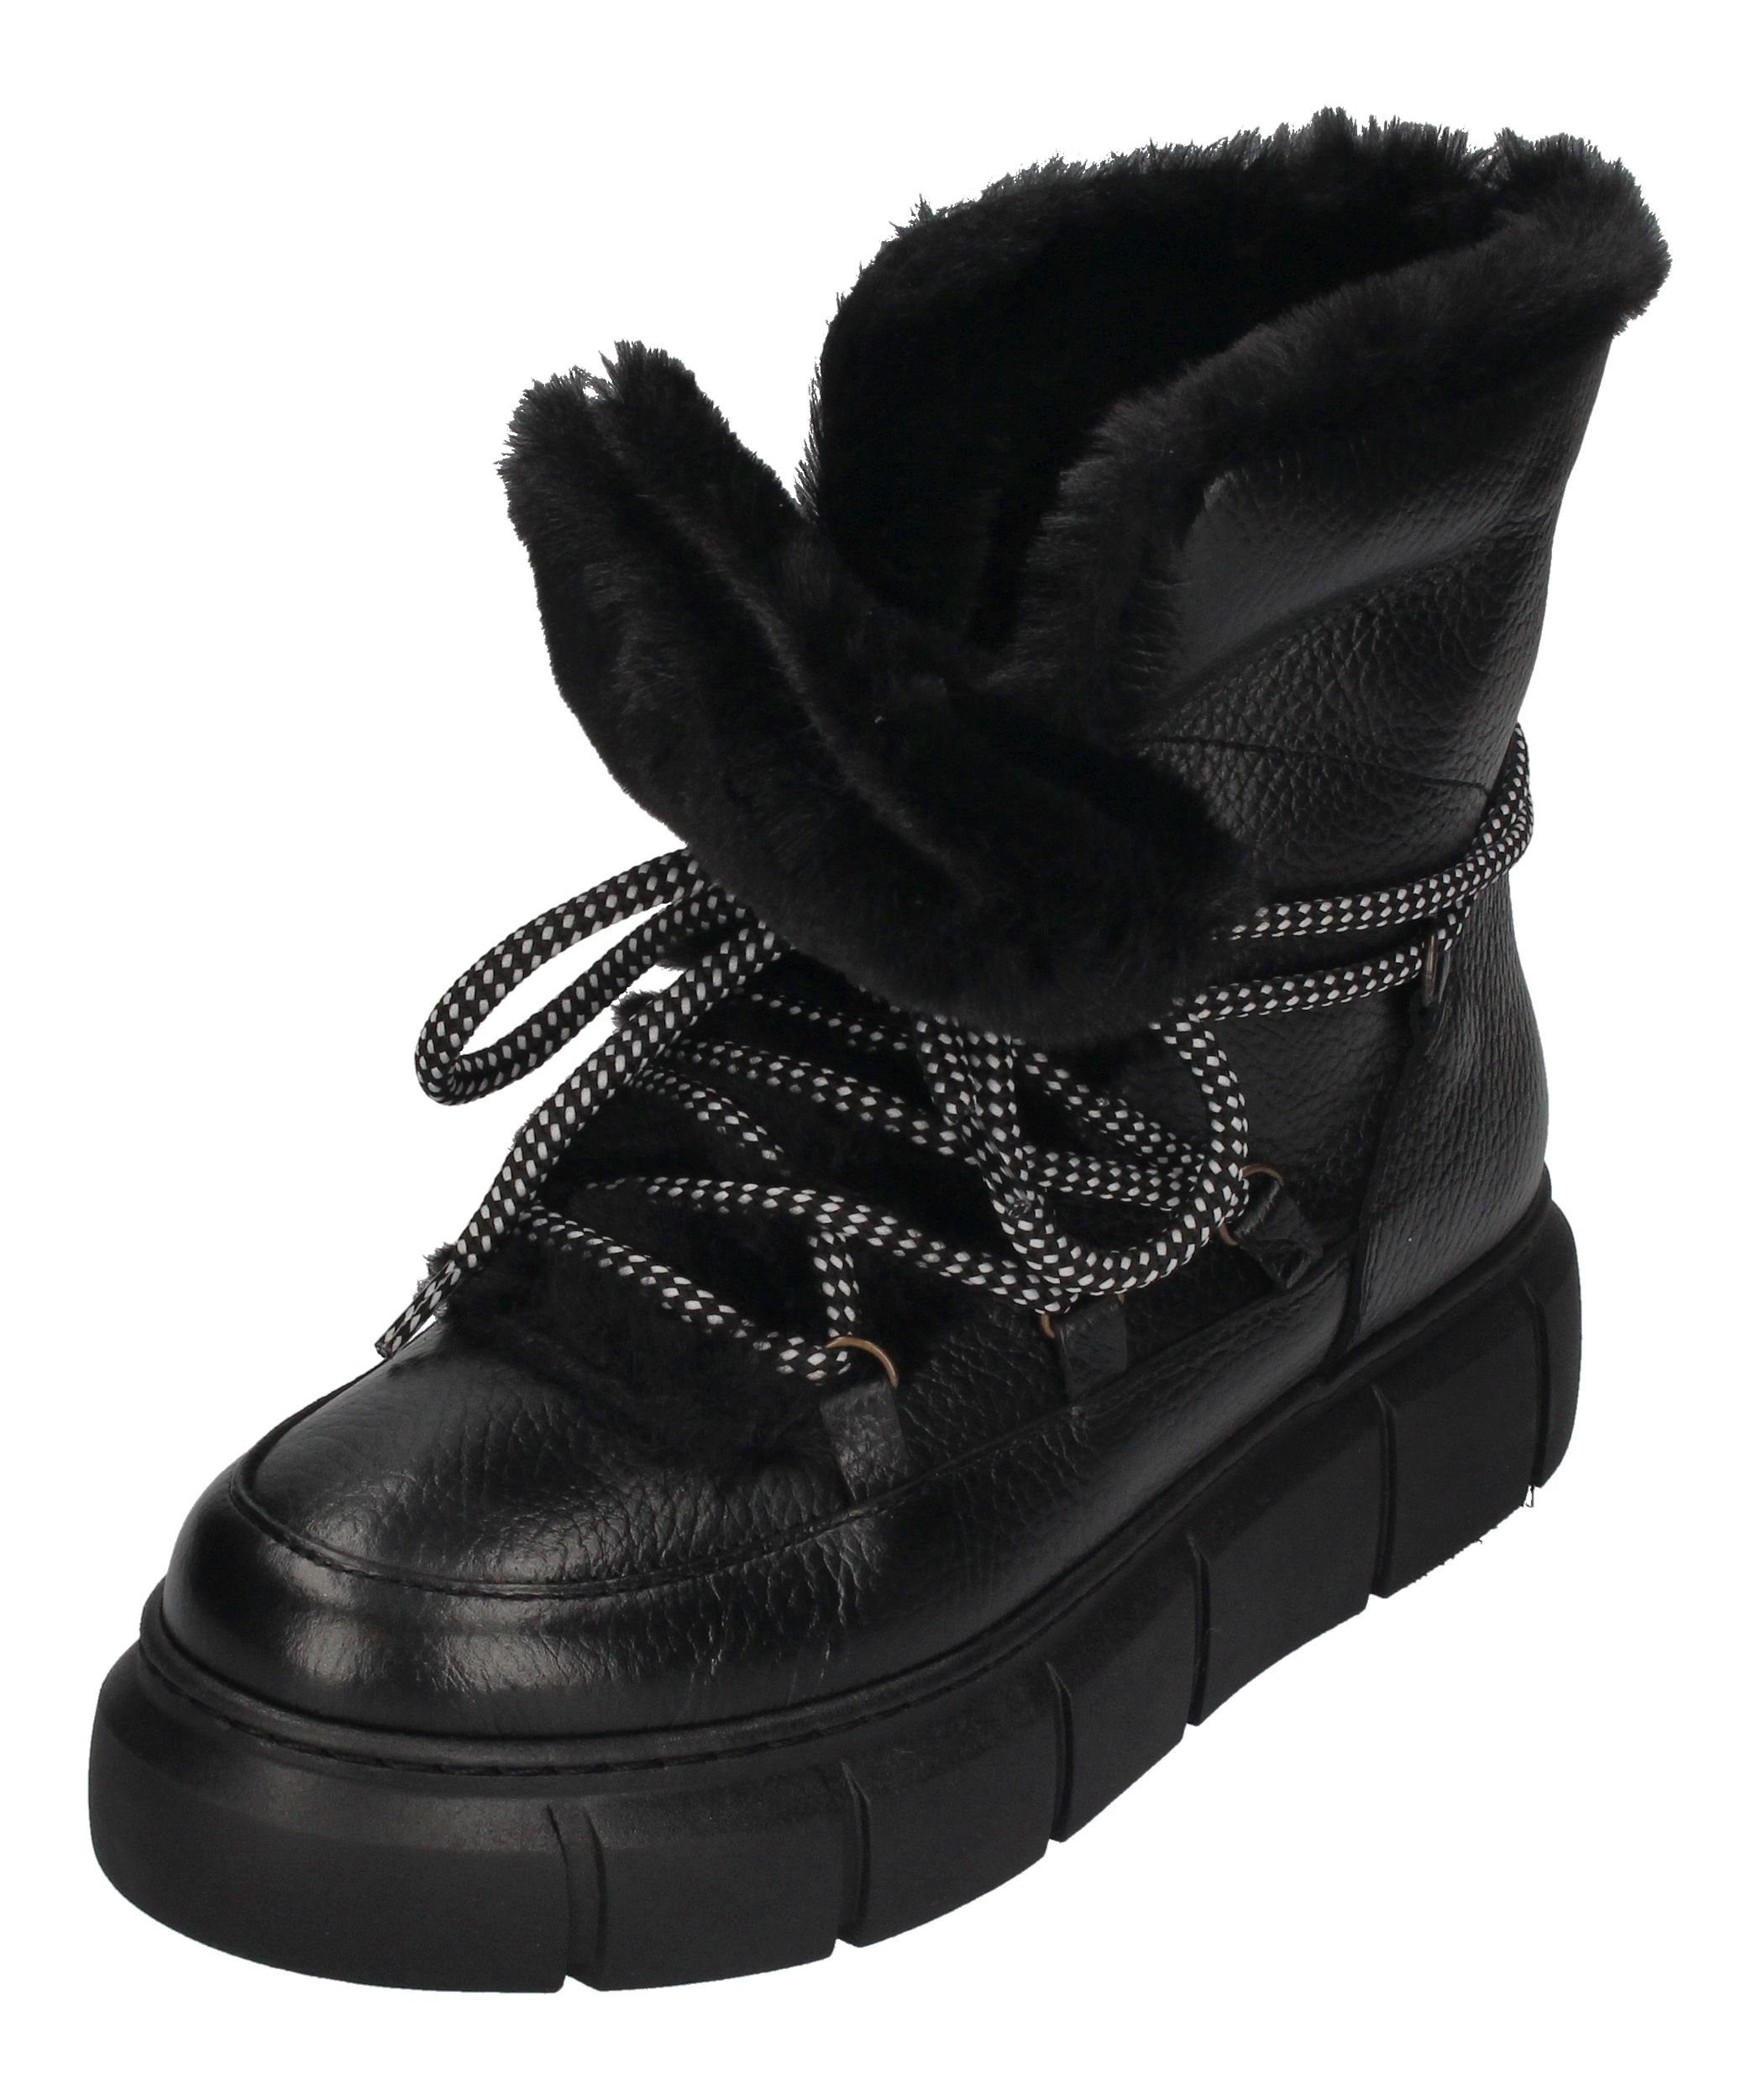 SHOE THE BEAR TOVE STB2204 Schnürboots Black